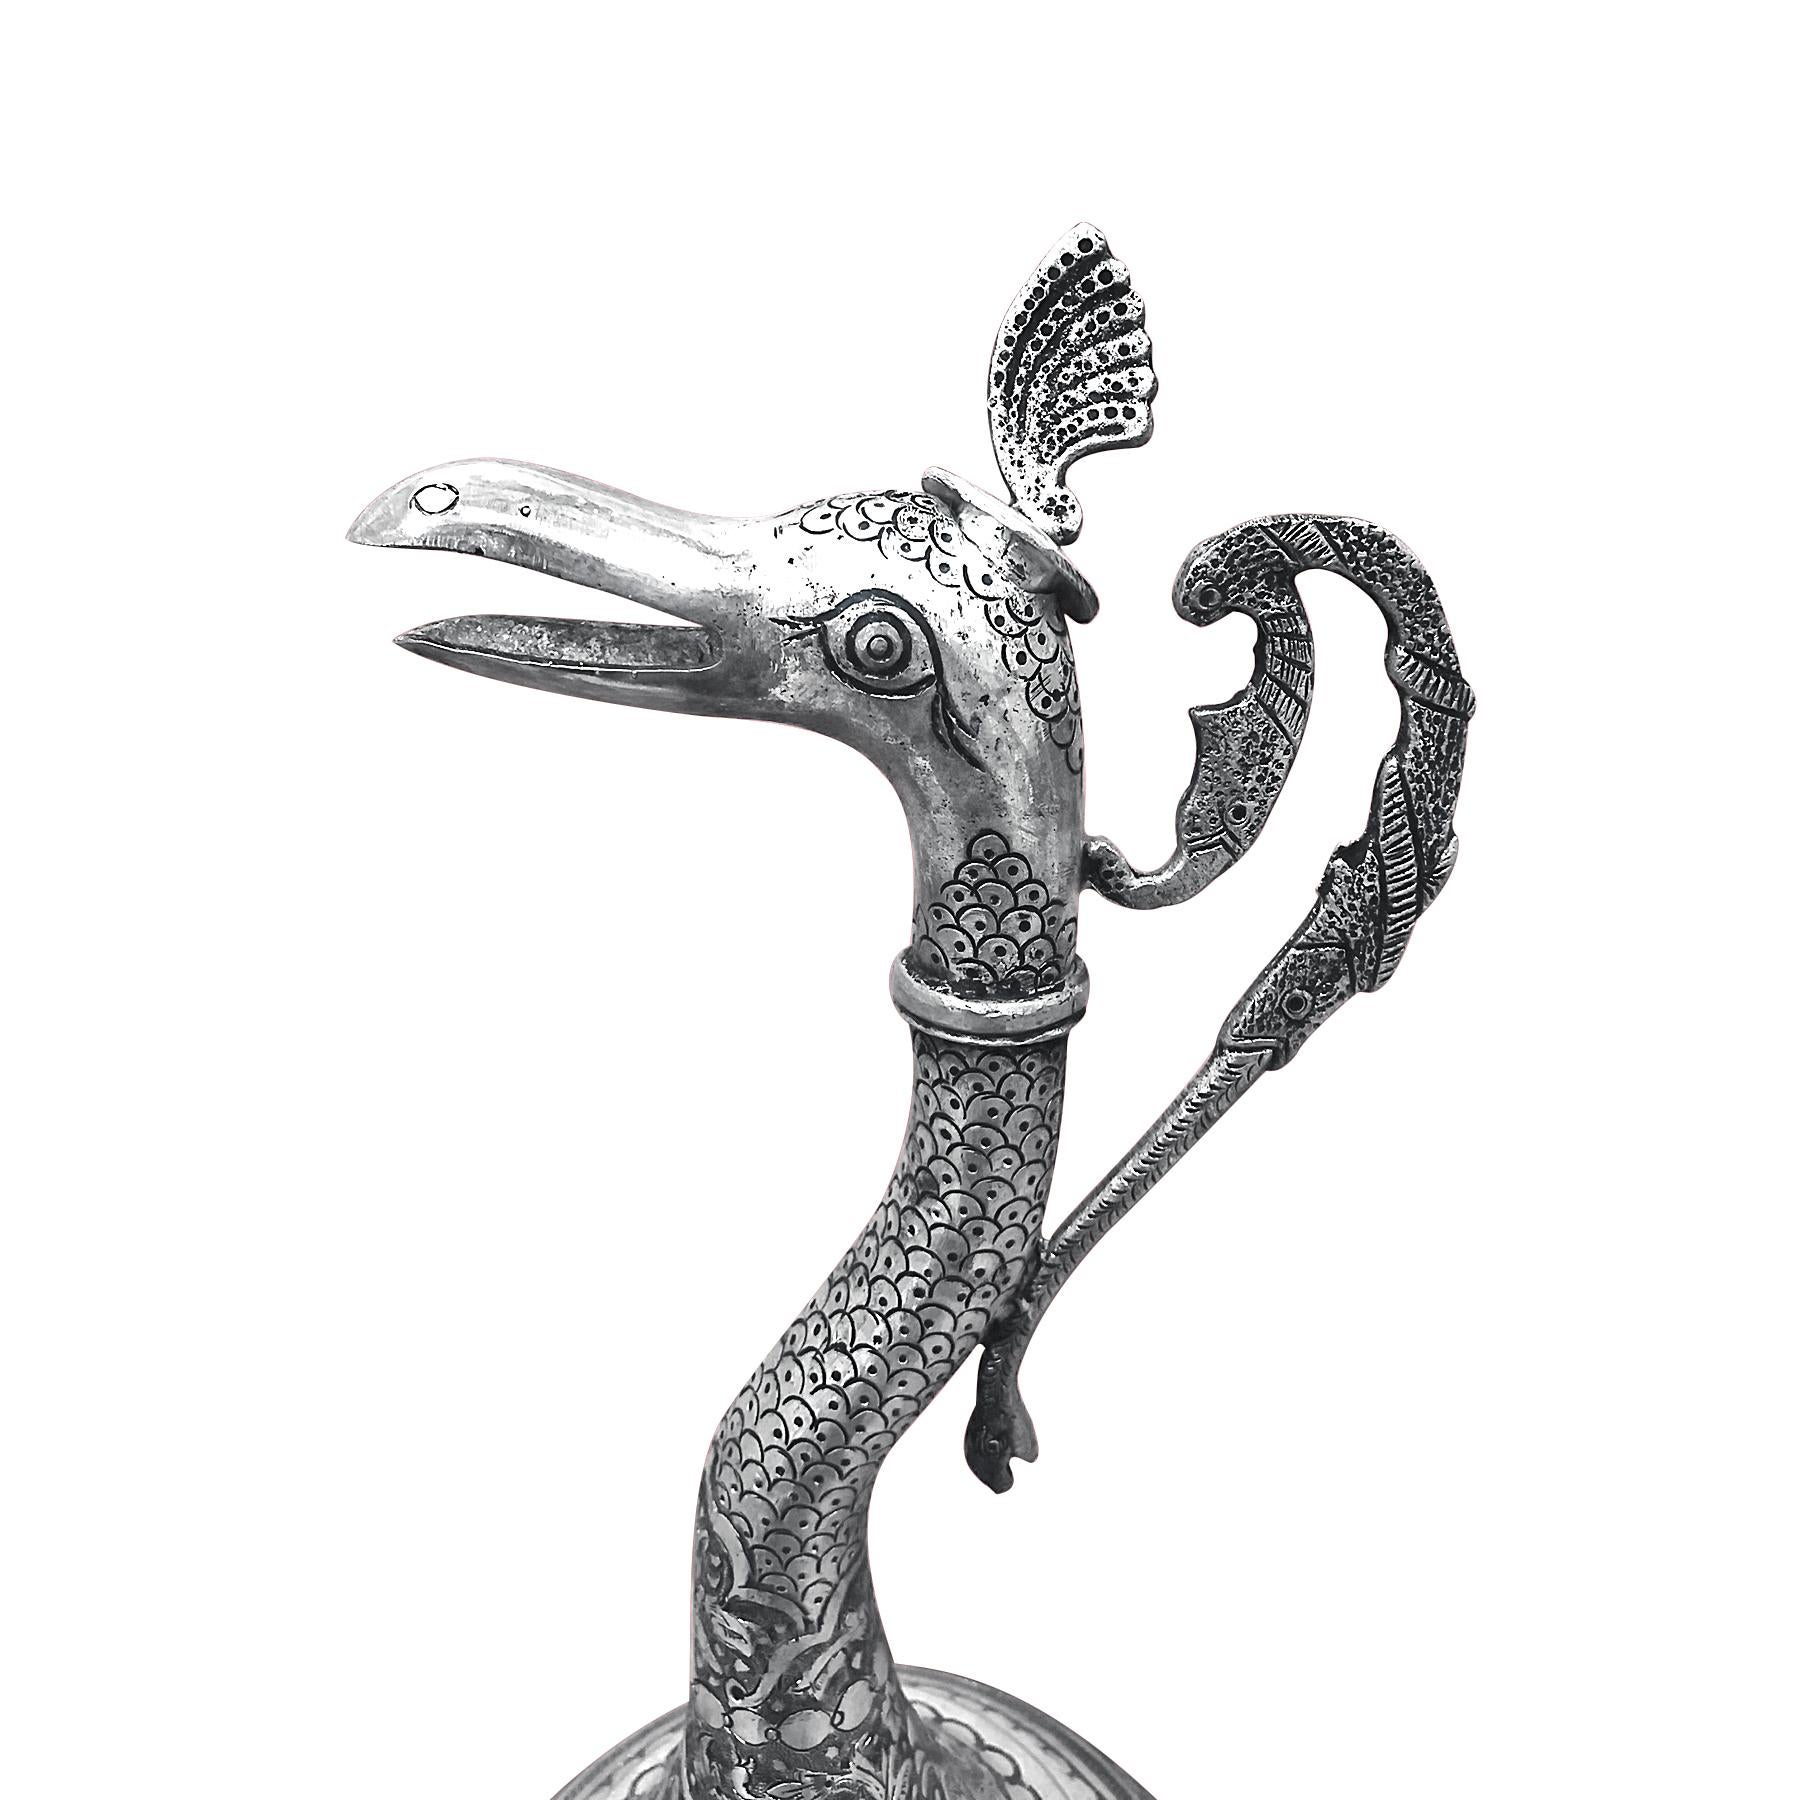 Vintage, dandy and well detailed, this Vertan swan-shaped wine jar was hand carved in Persia using Persian silver about 0.84 proof. With round bottom and tall neck, this old piece has a height of 14 inches, a width of 6 inches and weighs 1097 grams.